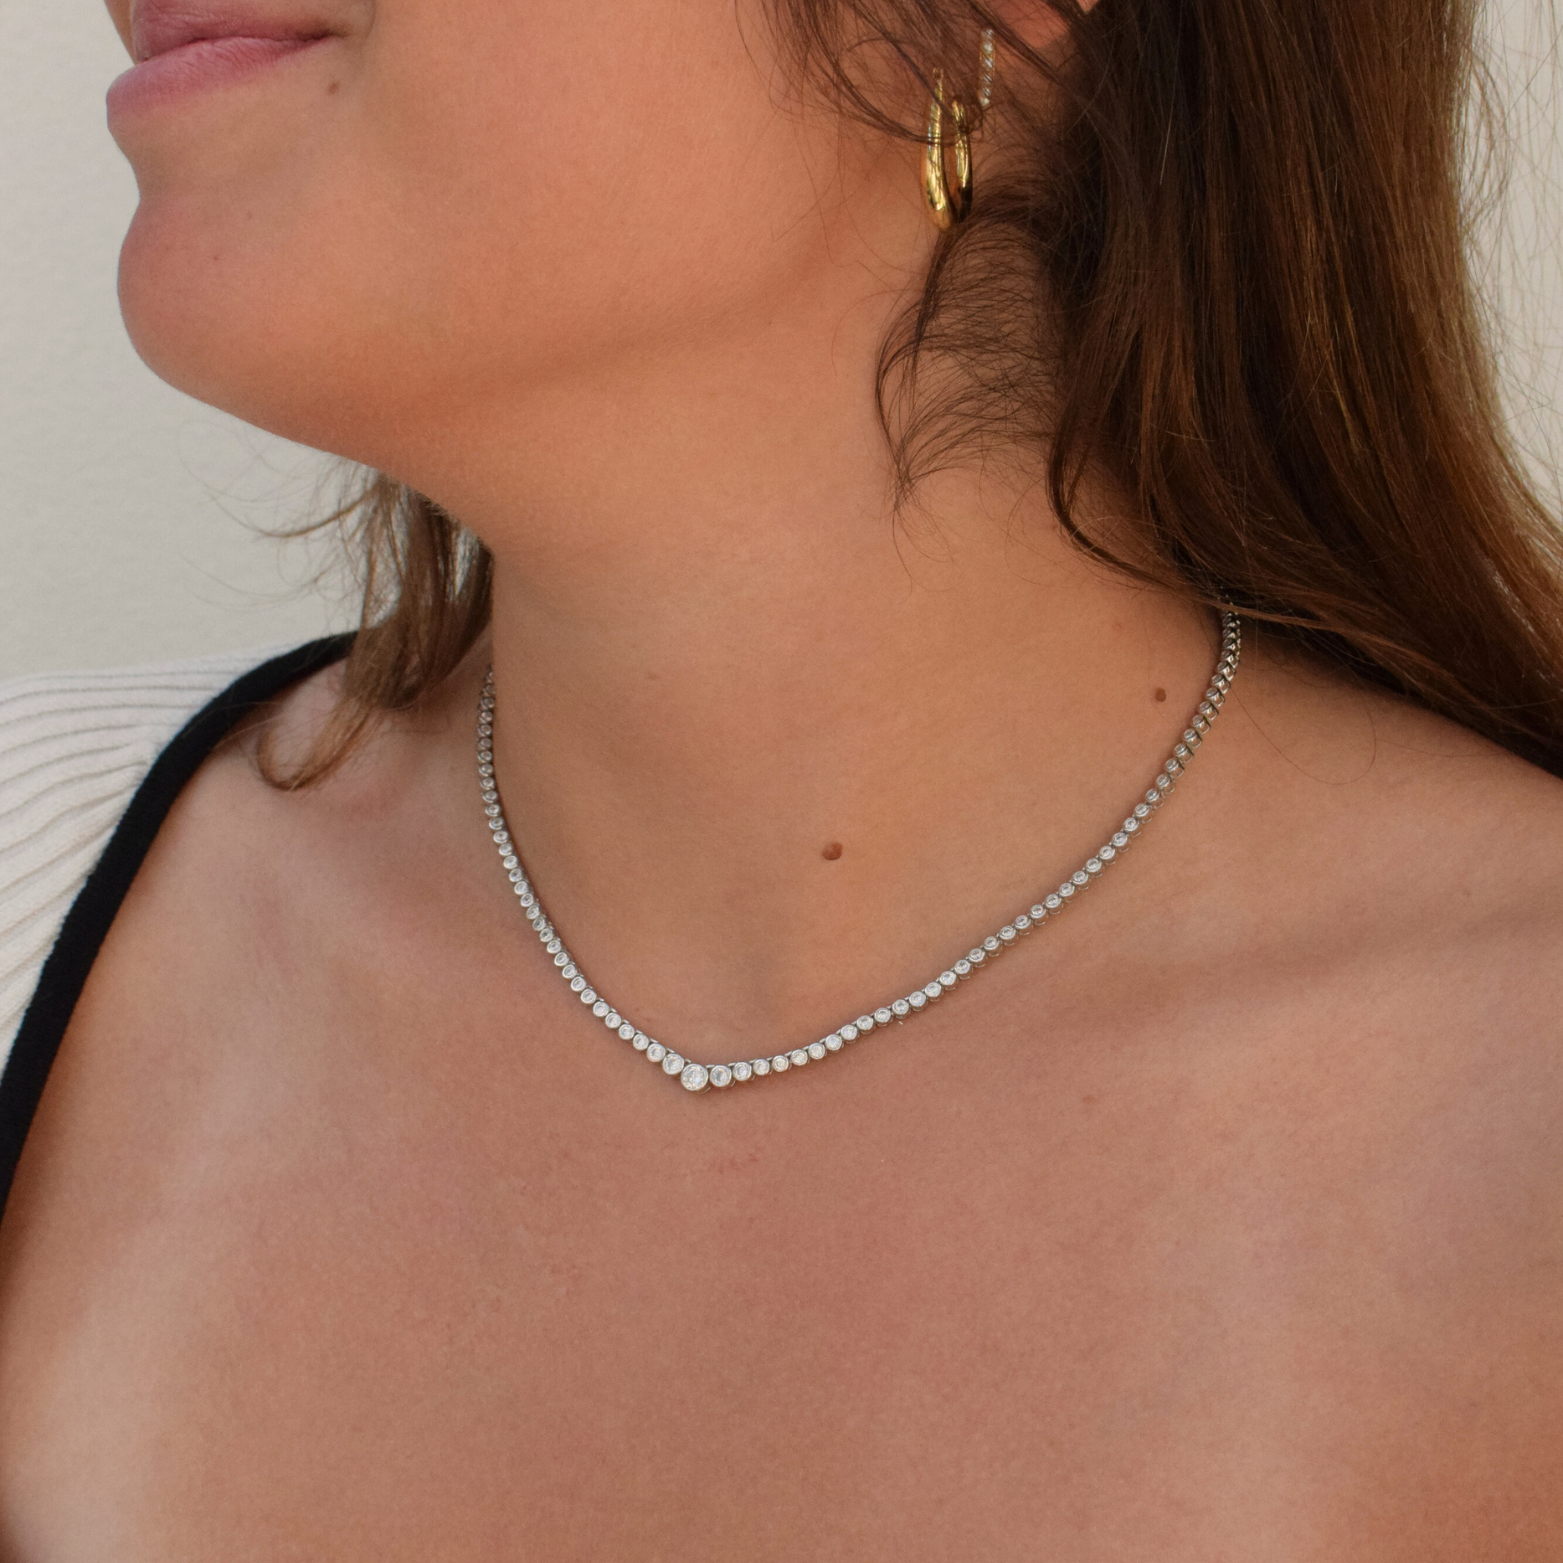 Elegant sterling silver tennis necklace with graduating diamonds worn by a woman